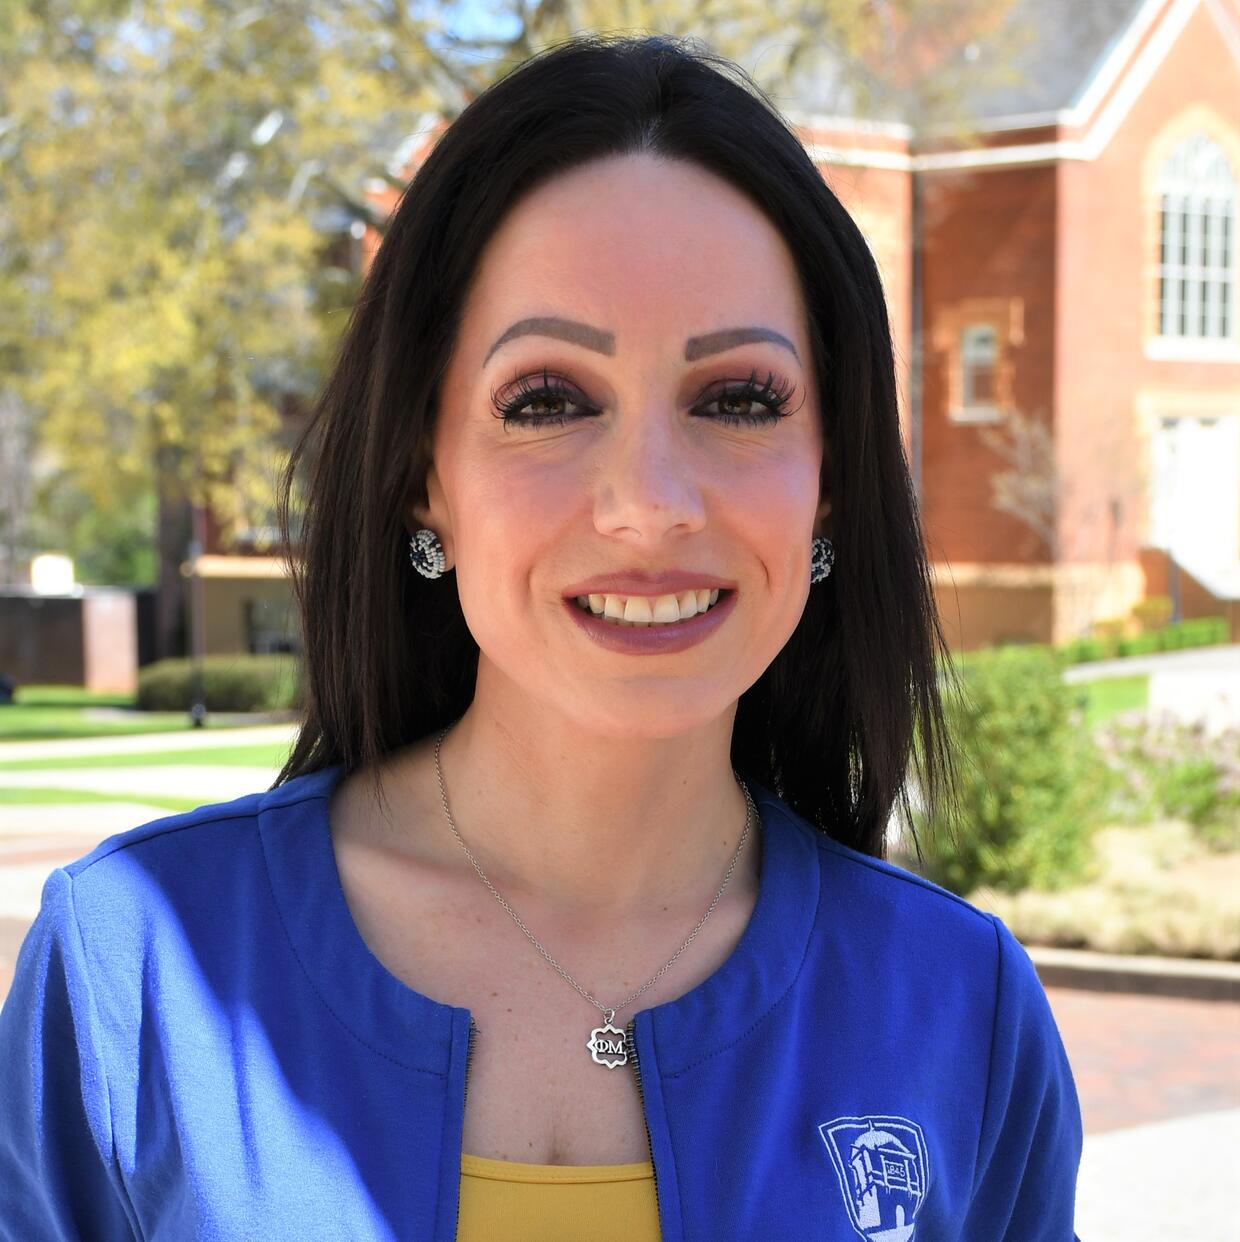 Limestone University Assistant Professor of Social Work Dr. Aubrey L. Sejuit was recently elected as the President of the National Association of Social Workers-South Carolina Chapter.